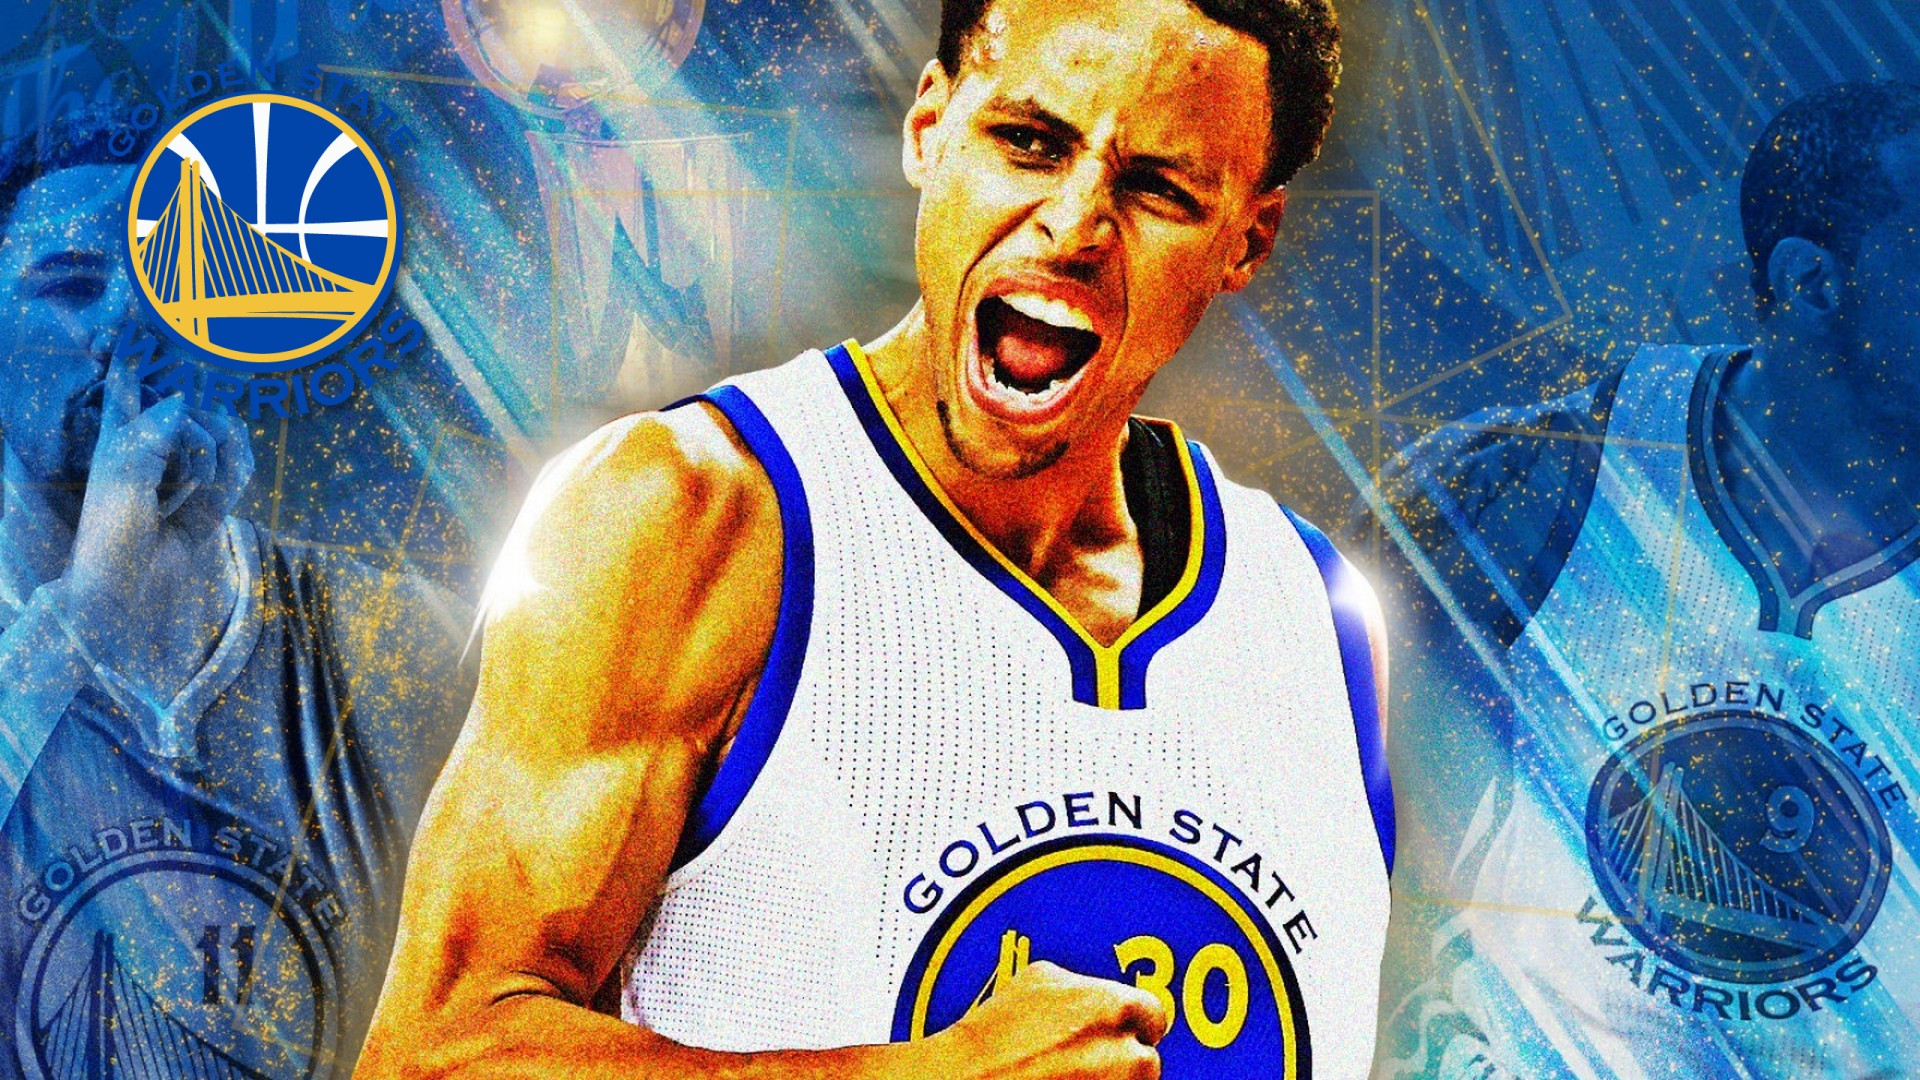 Stephen Curry Wallpaper with image dimensions 1920x1080 pixel. You can make this wallpaper for your Desktop Computer Backgrounds, Windows or Mac Screensavers, iPhone Lock screen, Tablet or Android and another Mobile Phone device